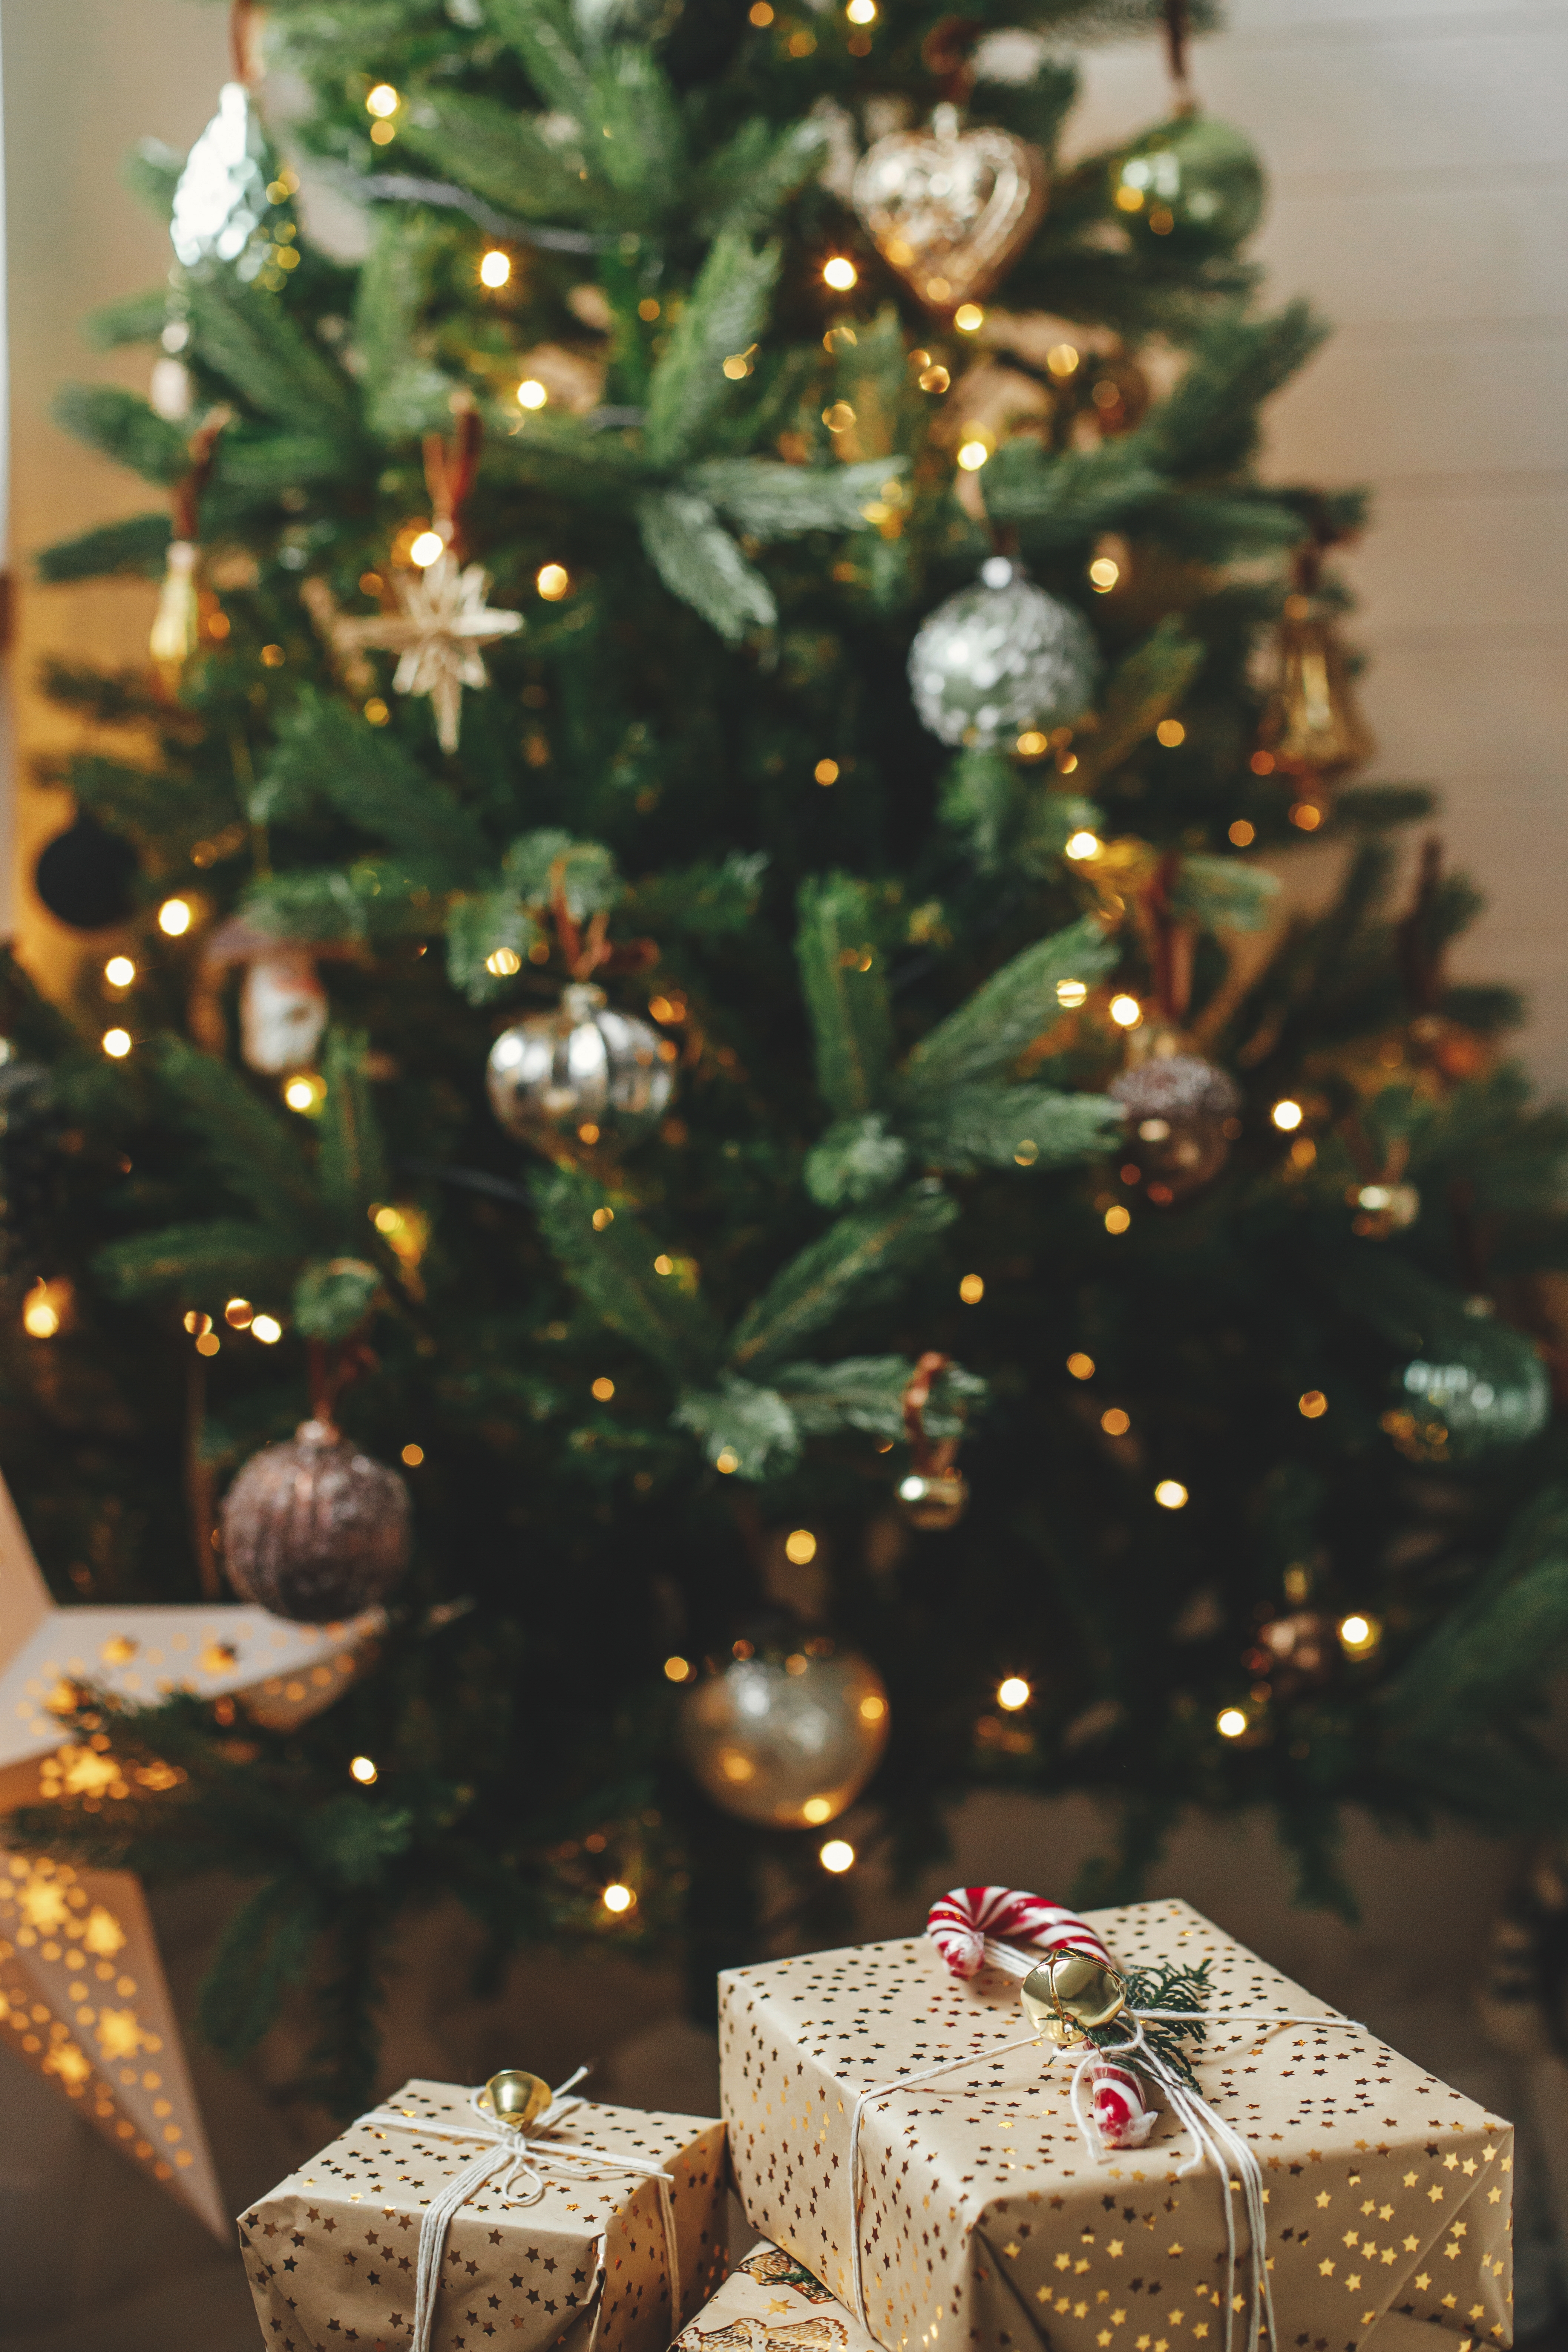 Gift boxes placed underneath a Christmas tree | Source: Shutterstock